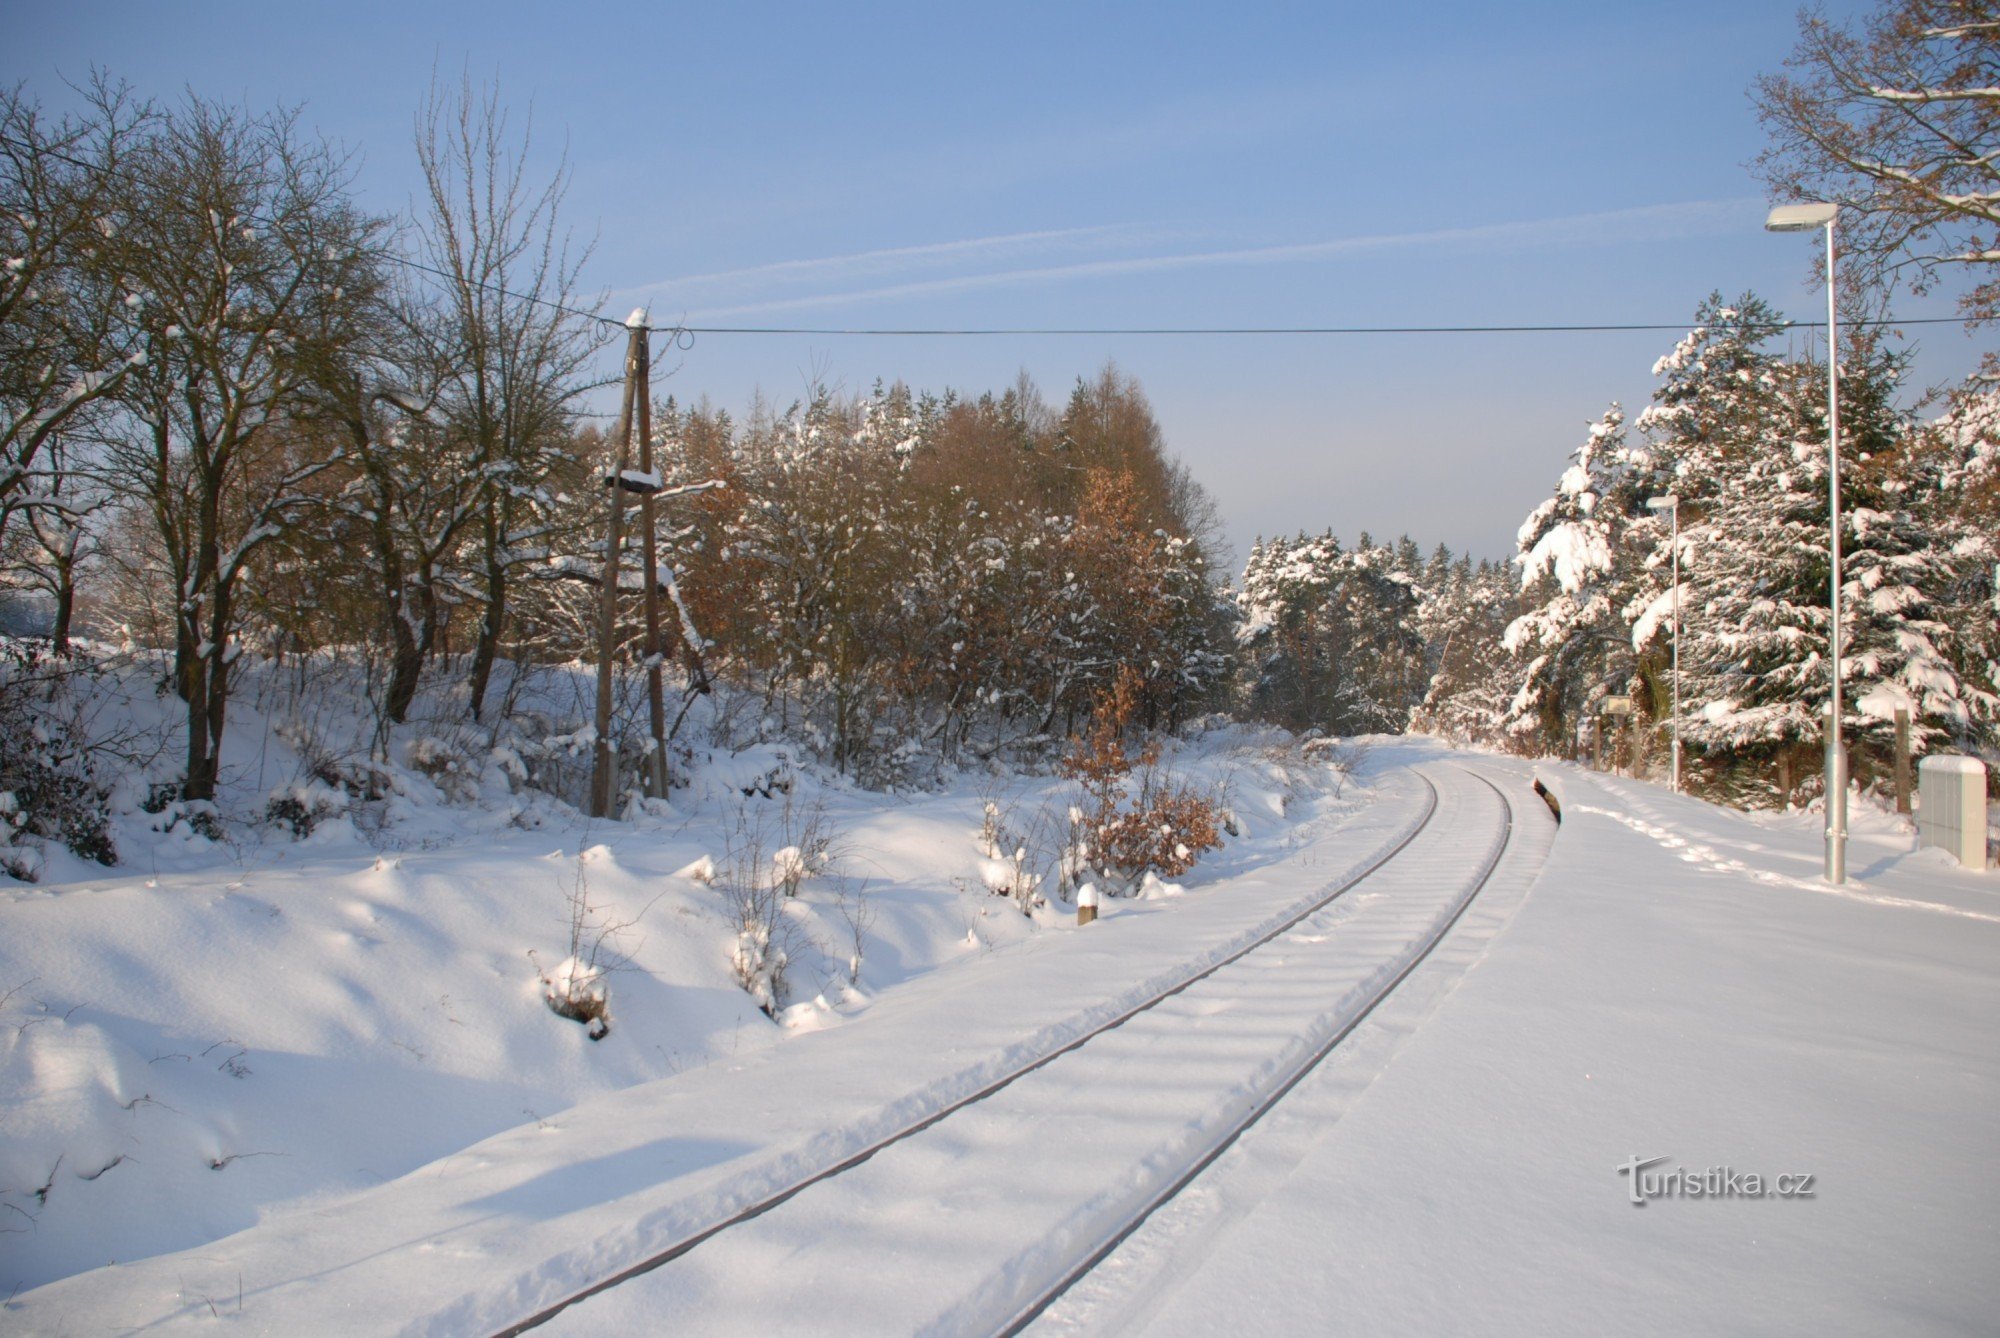 tracks in the direction of Bezdružice under the snow, Blahousty railway station